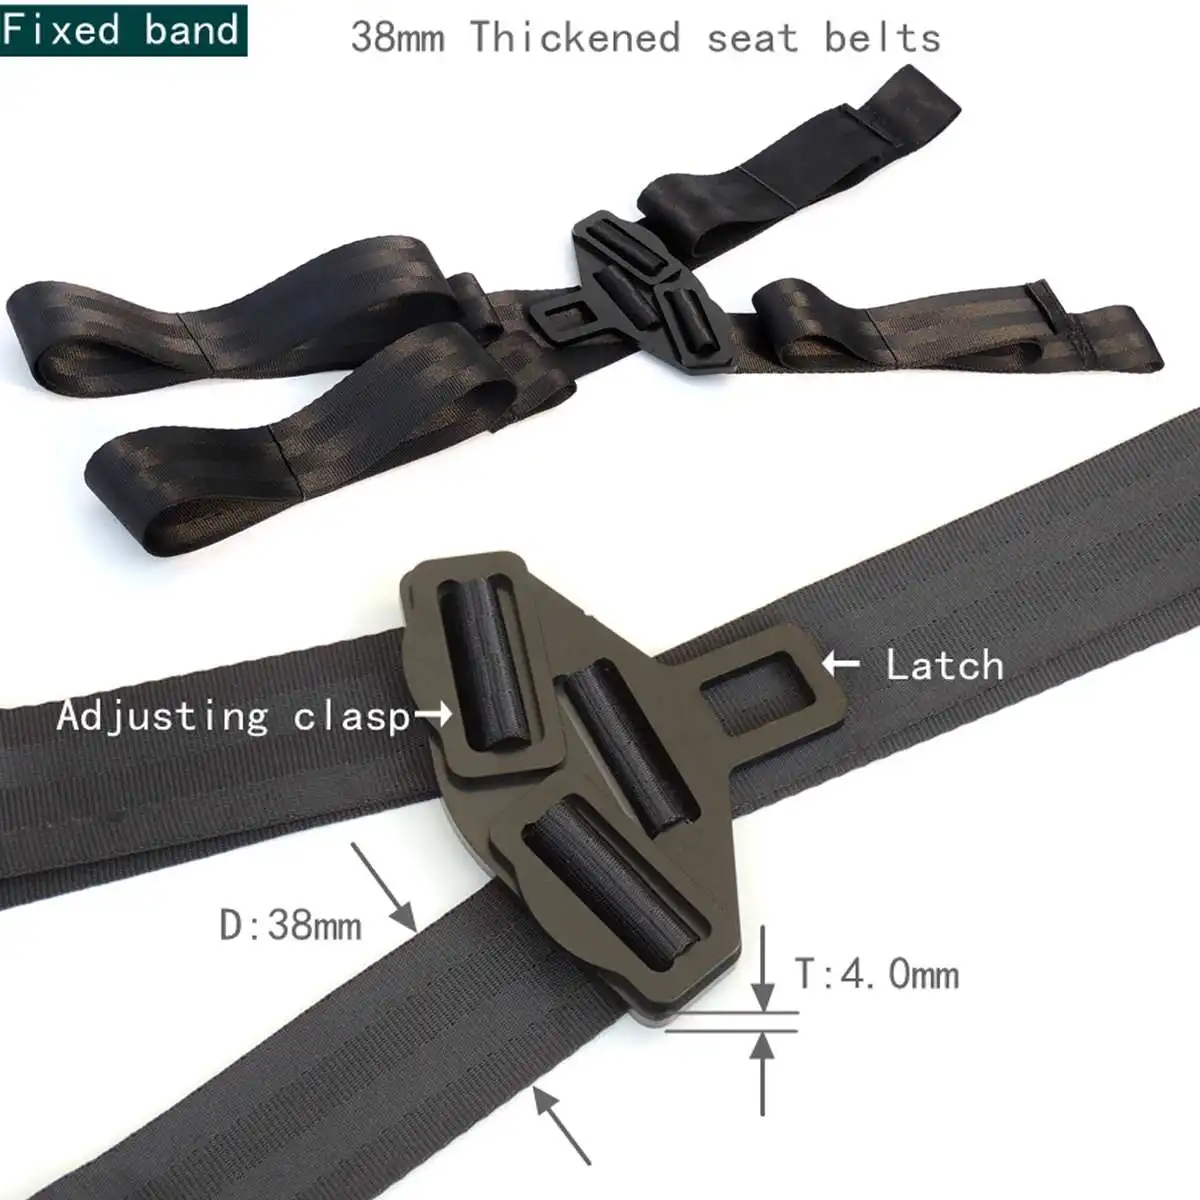 Car ISOFIX Latc h Seatbelt Interface Bracket with Fixed Band Connector Thicken Steel Car Seat Bracket for Child Safety Seat